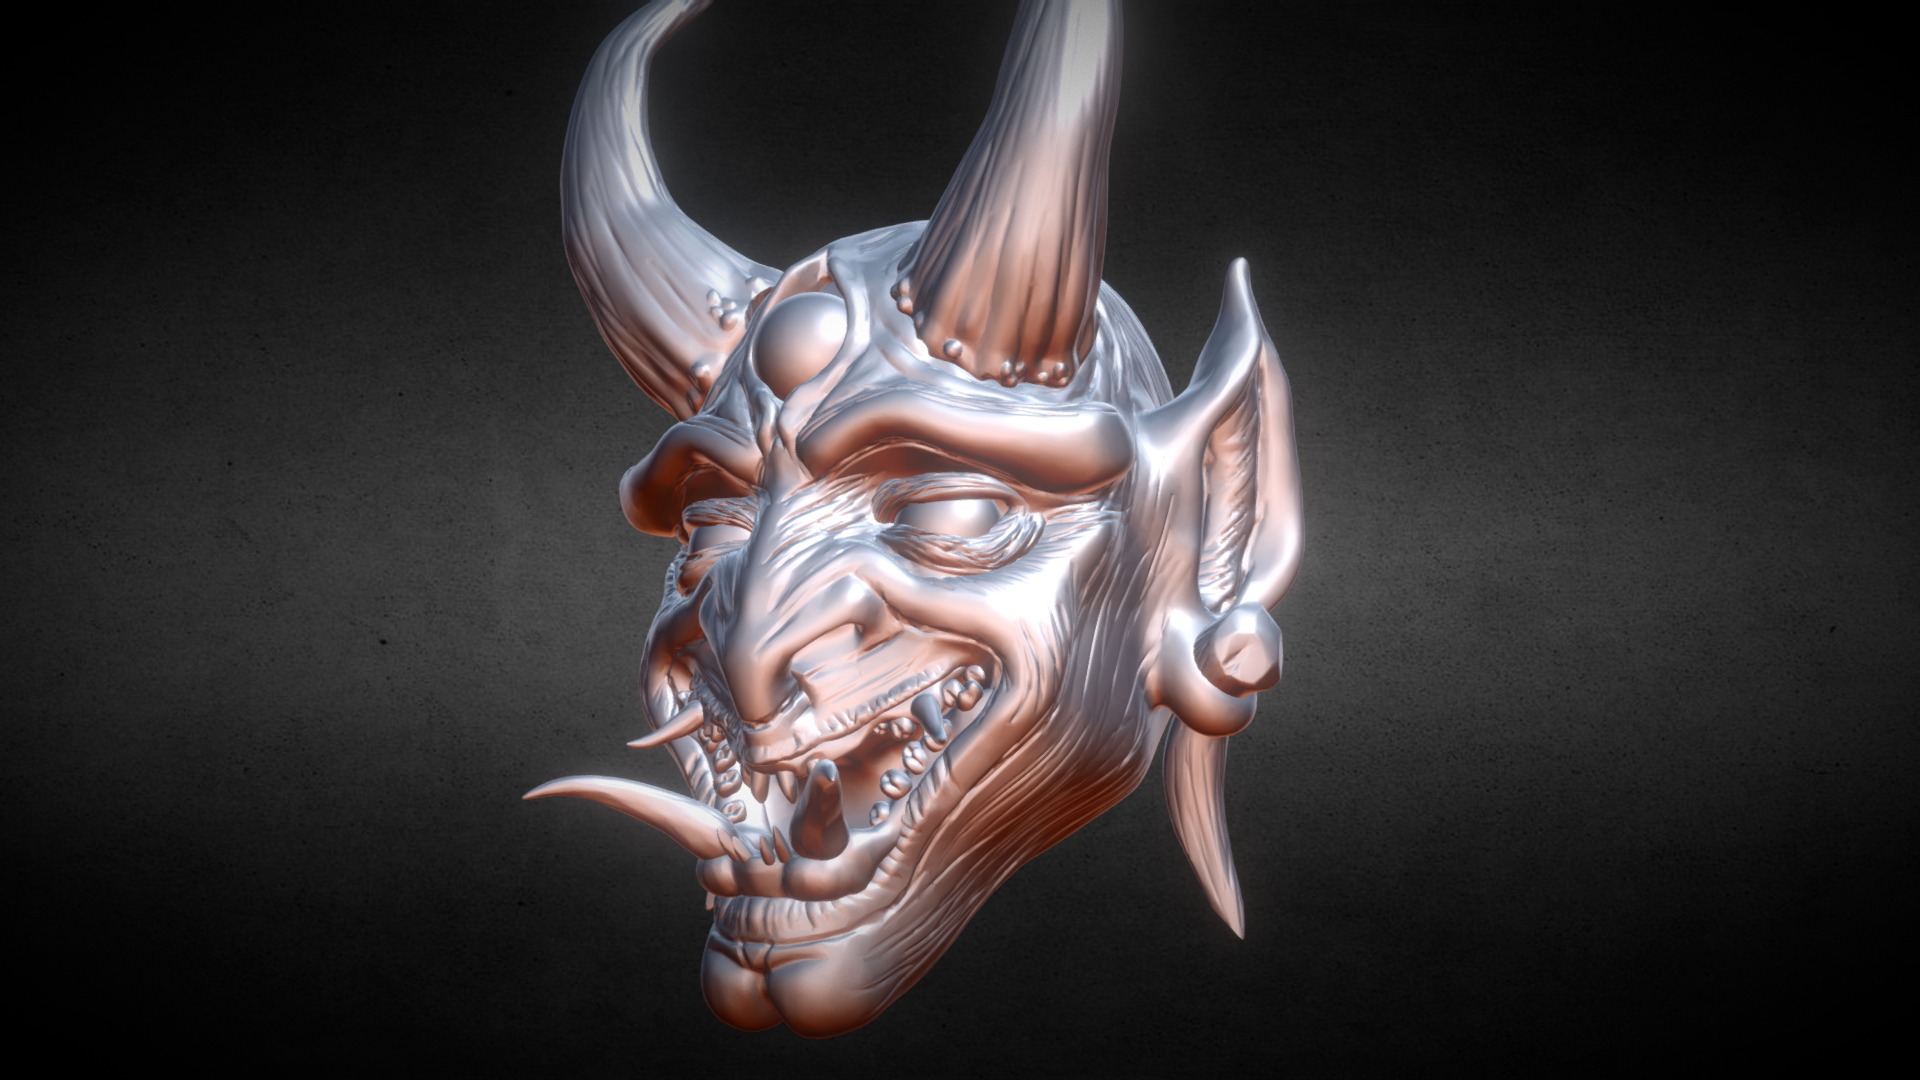 3D model Day 02 SculptJanuary 2018 Oni Mask - This is a 3D model of the Day 02 SculptJanuary 2018 Oni Mask. The 3D model is about a metal sculpture of a bull.